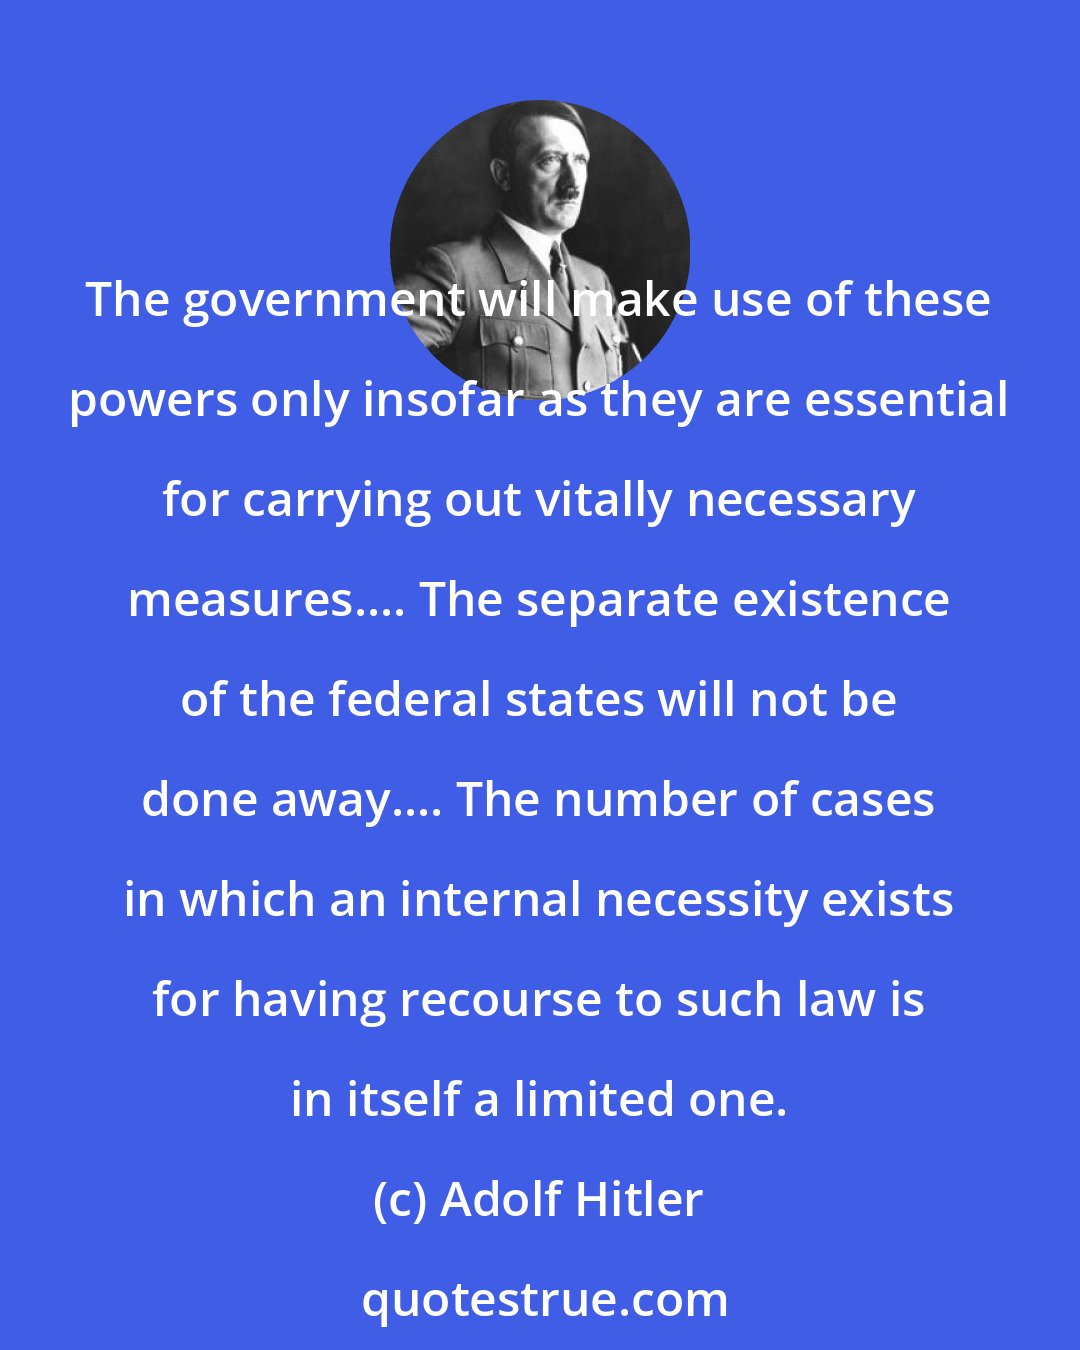 Adolf Hitler: The government will make use of these powers only insofar as they are essential for carrying out vitally necessary measures.... The separate existence of the federal states will not be done away.... The number of cases in which an internal necessity exists for having recourse to such law is in itself a limited one.